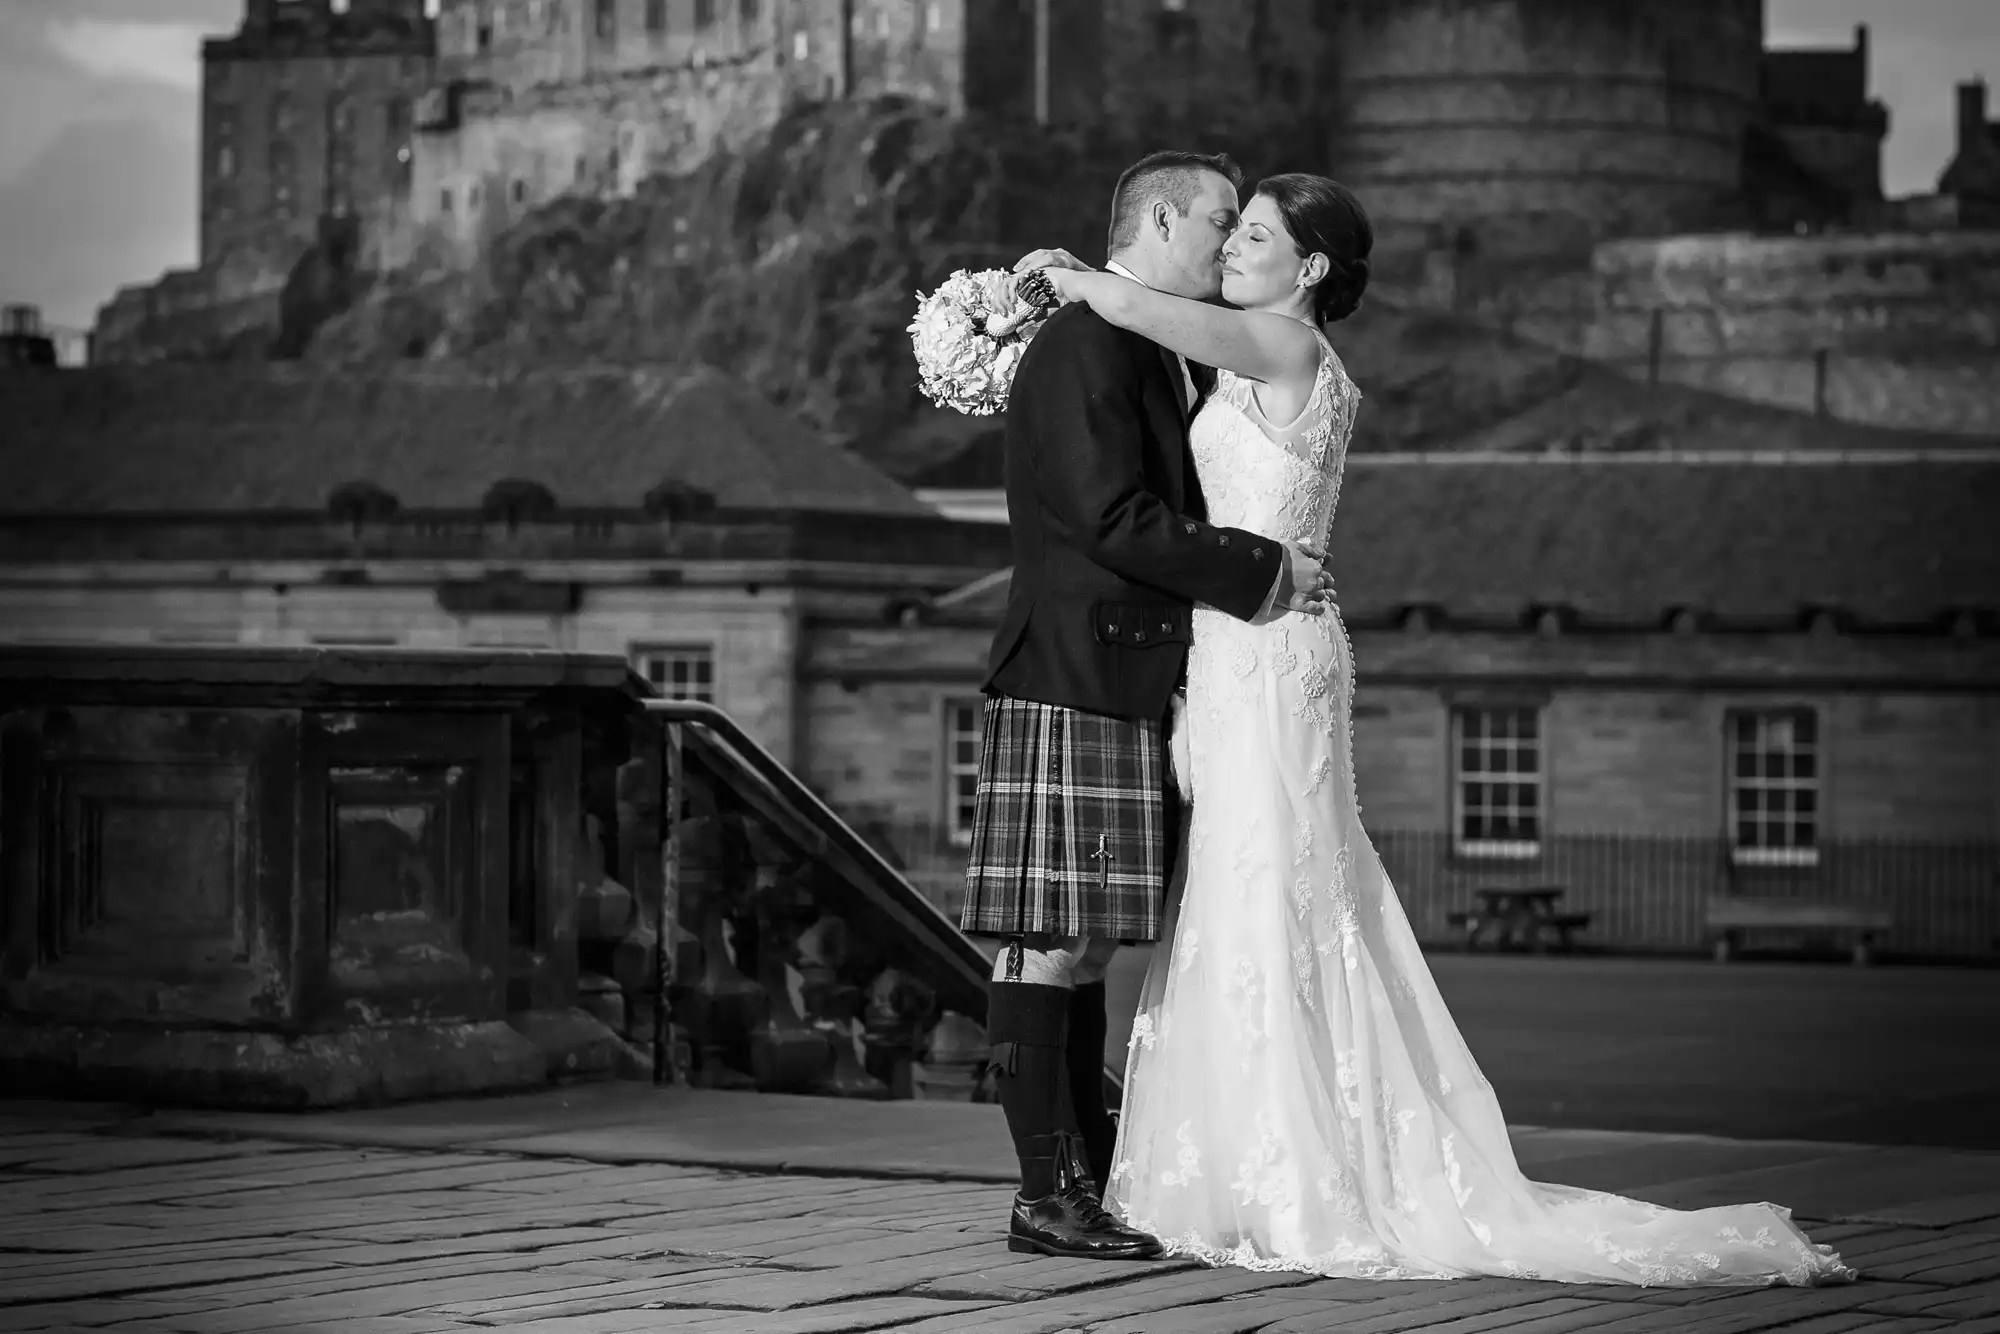 A bride and groom kissing passionately in formal wedding attire, with a historic castle illuminated in the background, all captured in black and white.